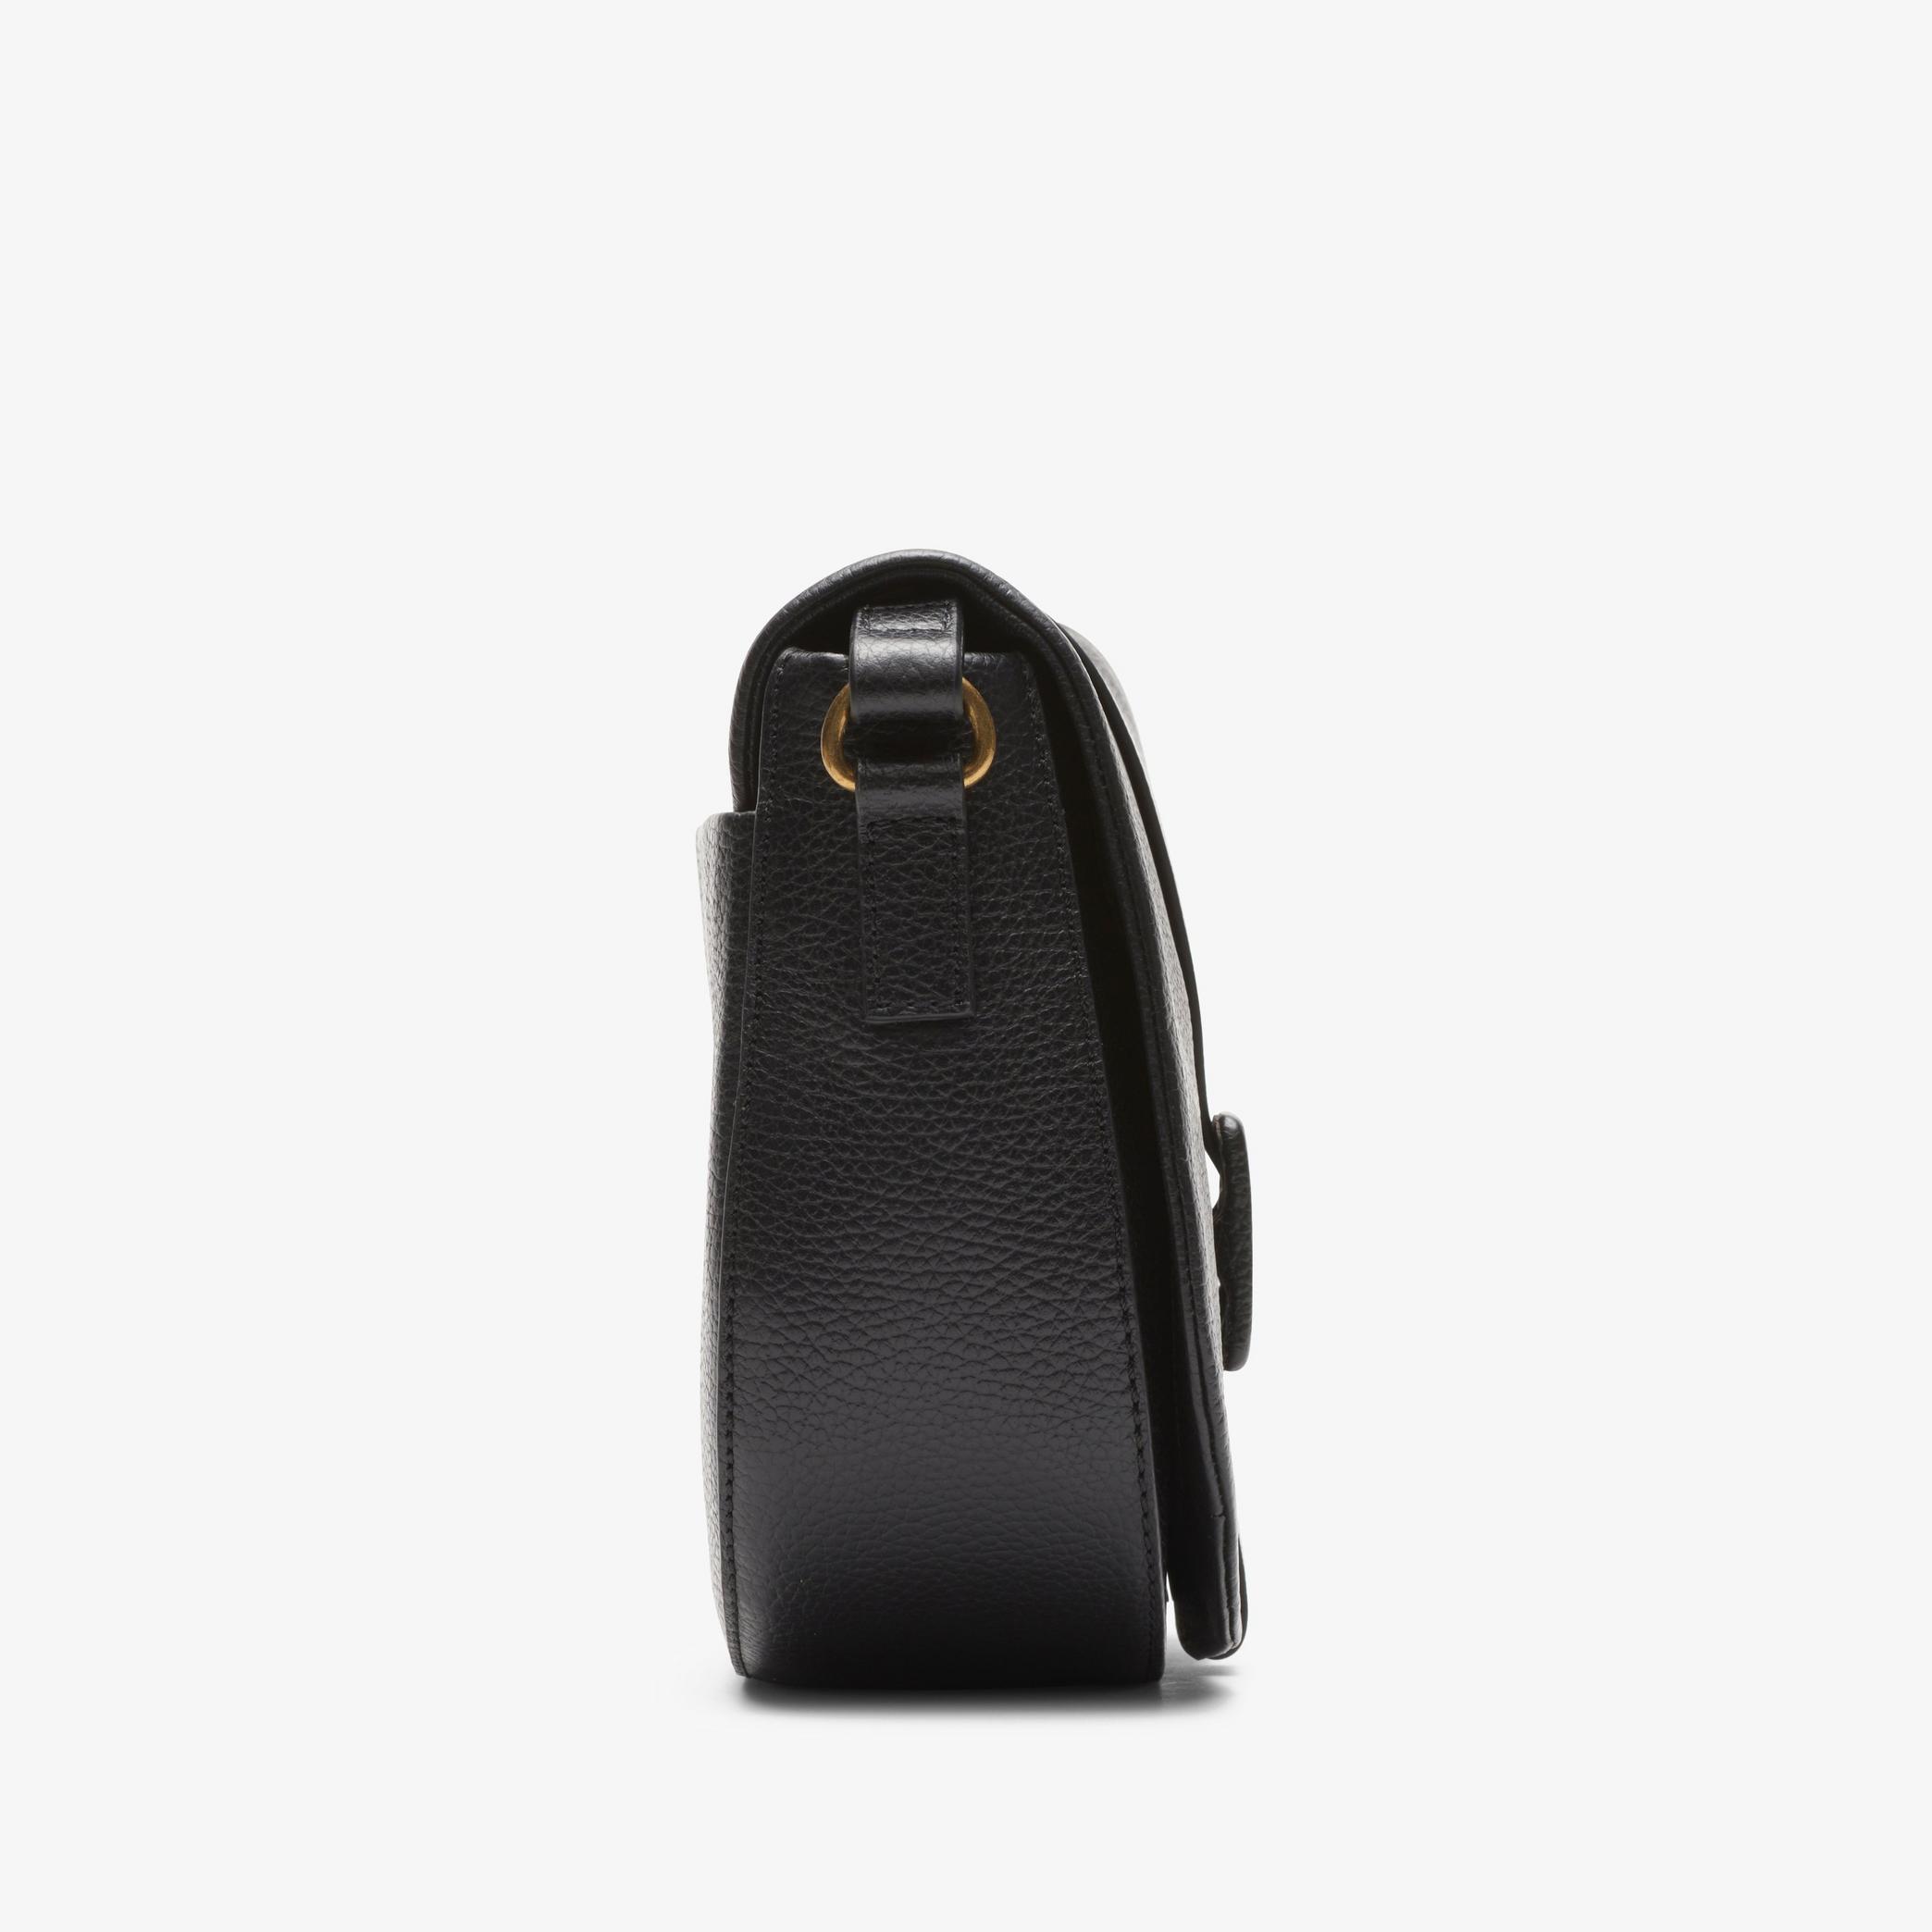 Noni Saddle Black Leather Across Body Bag, view 3 of 4